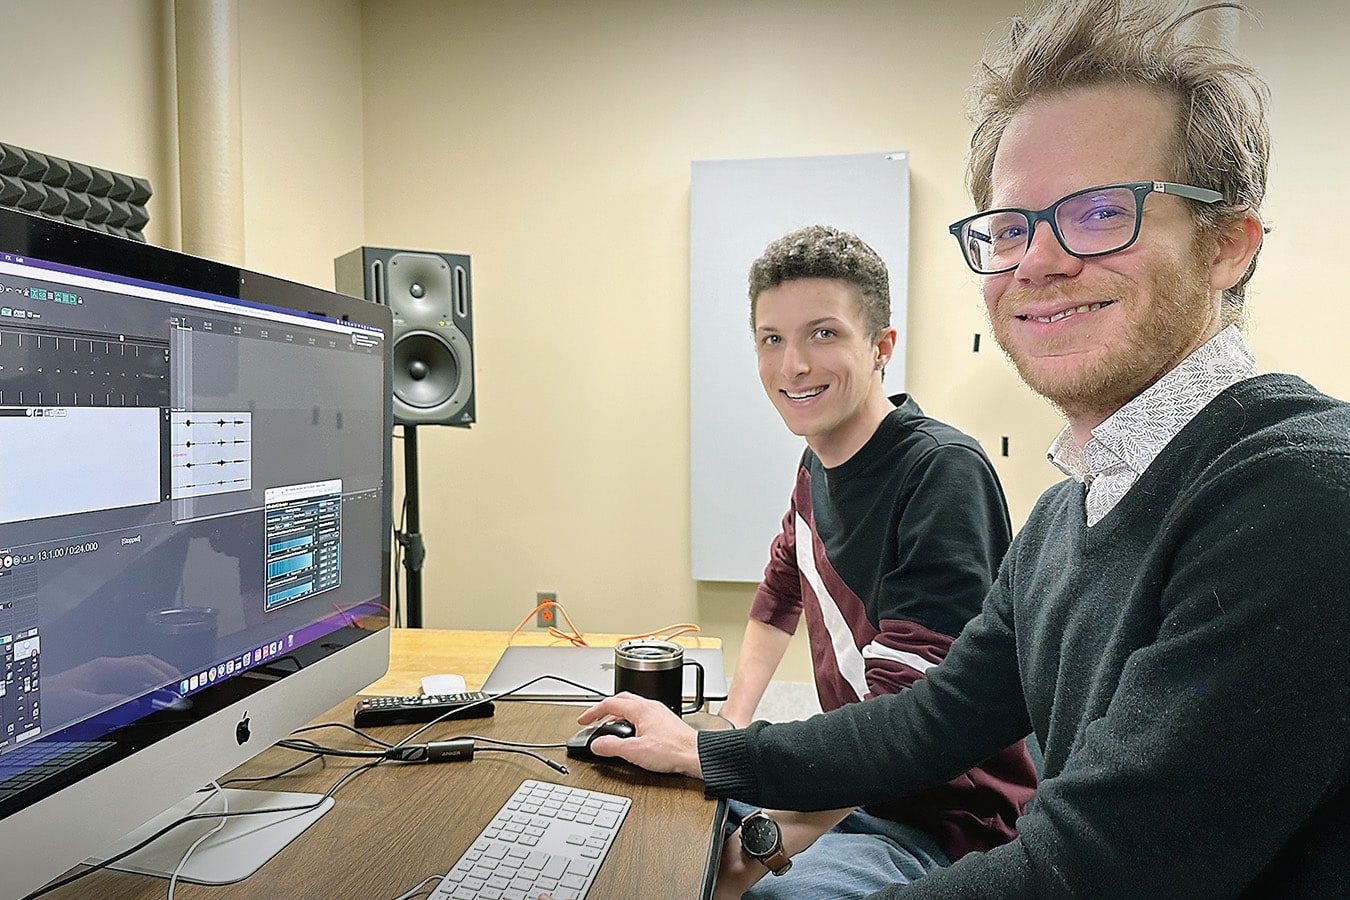 DSU student Carter Gordon is collaborating with Dr. Tate Carson on “Resonant Landscapes: Soundscapes of South Dakota,” a research project which will use field recordings from South Dakota state parks to electronically create music.